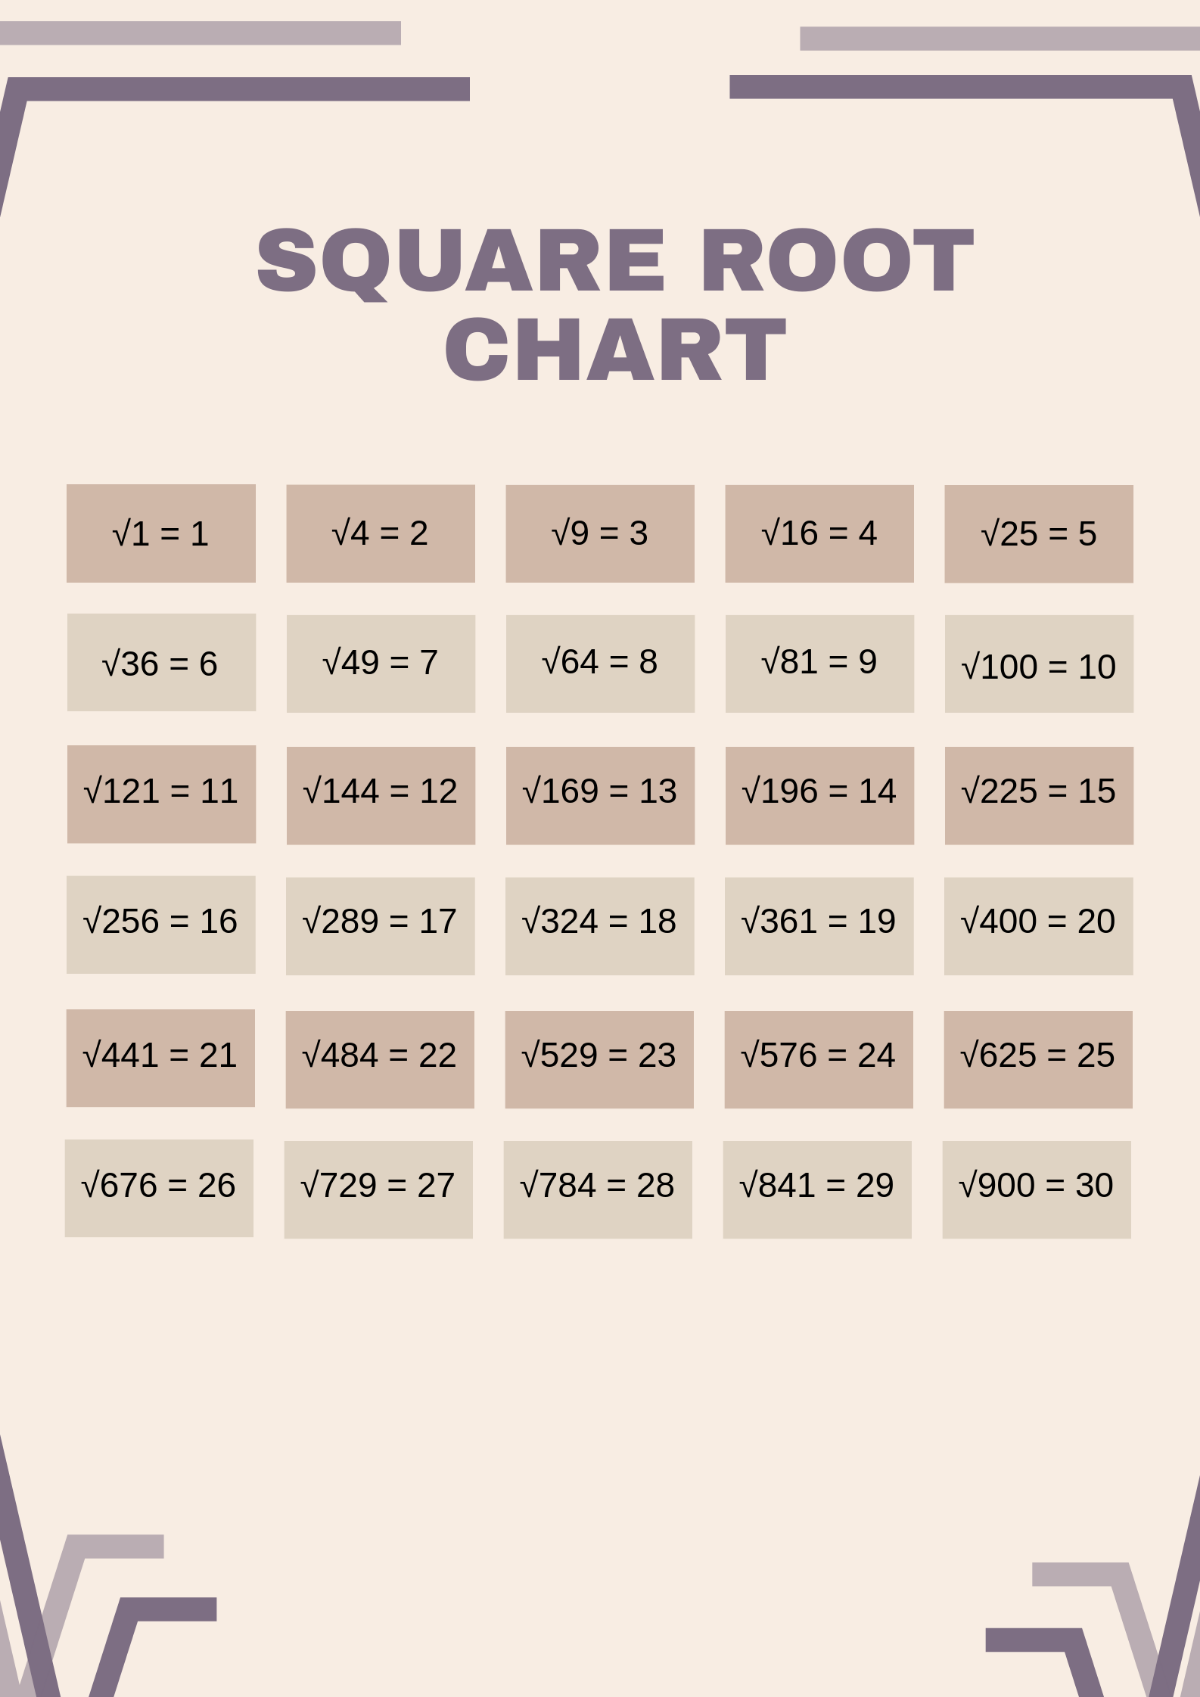 Square Root Chart Template